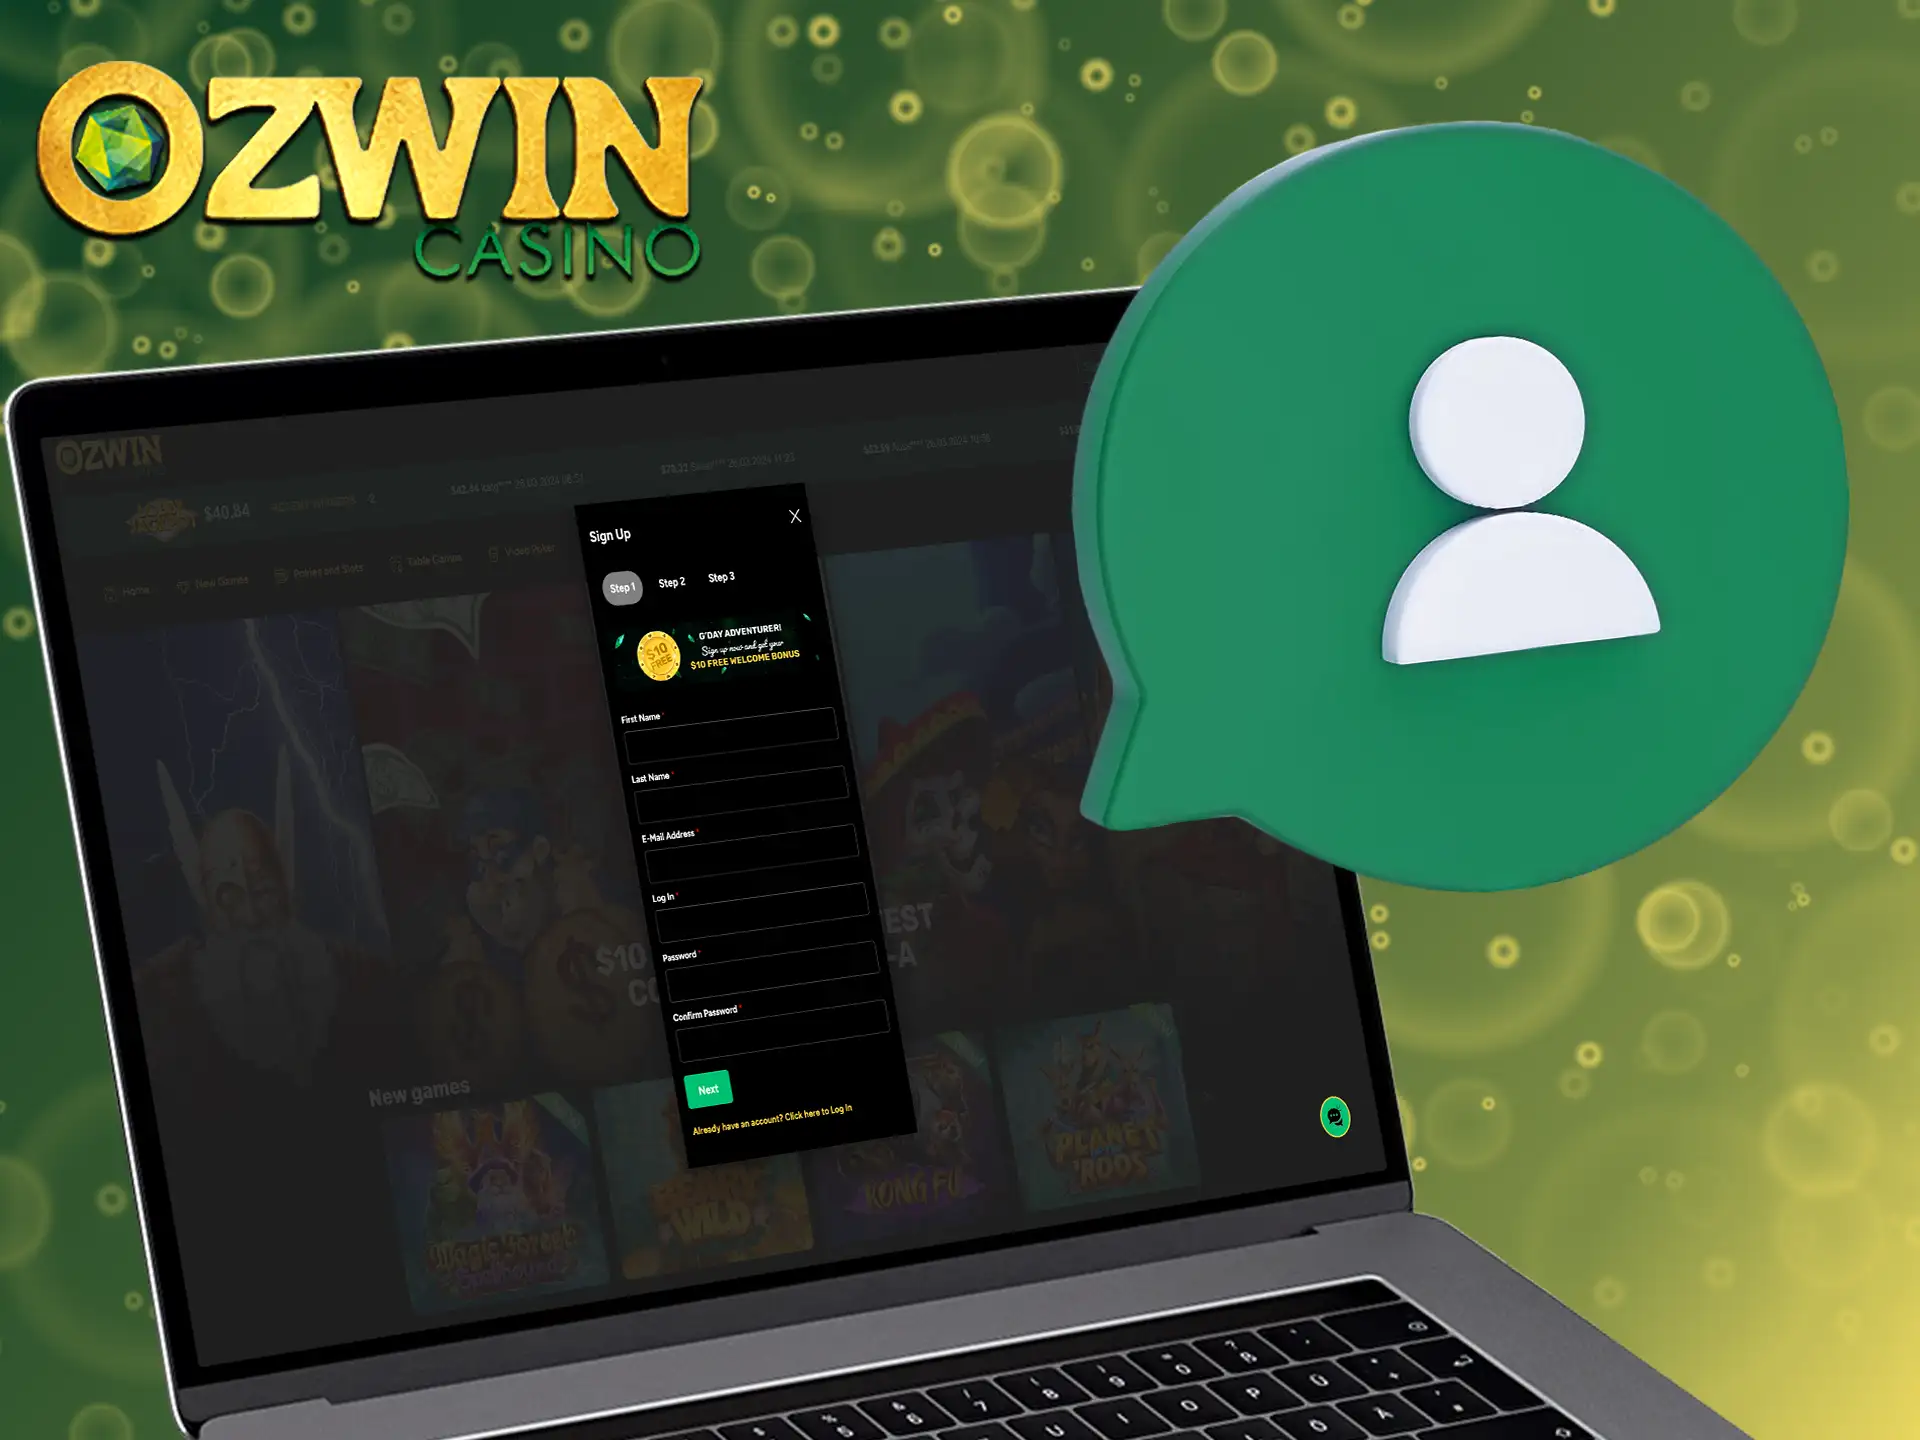 Register an Ozwin account using this quick step-by-step guide.